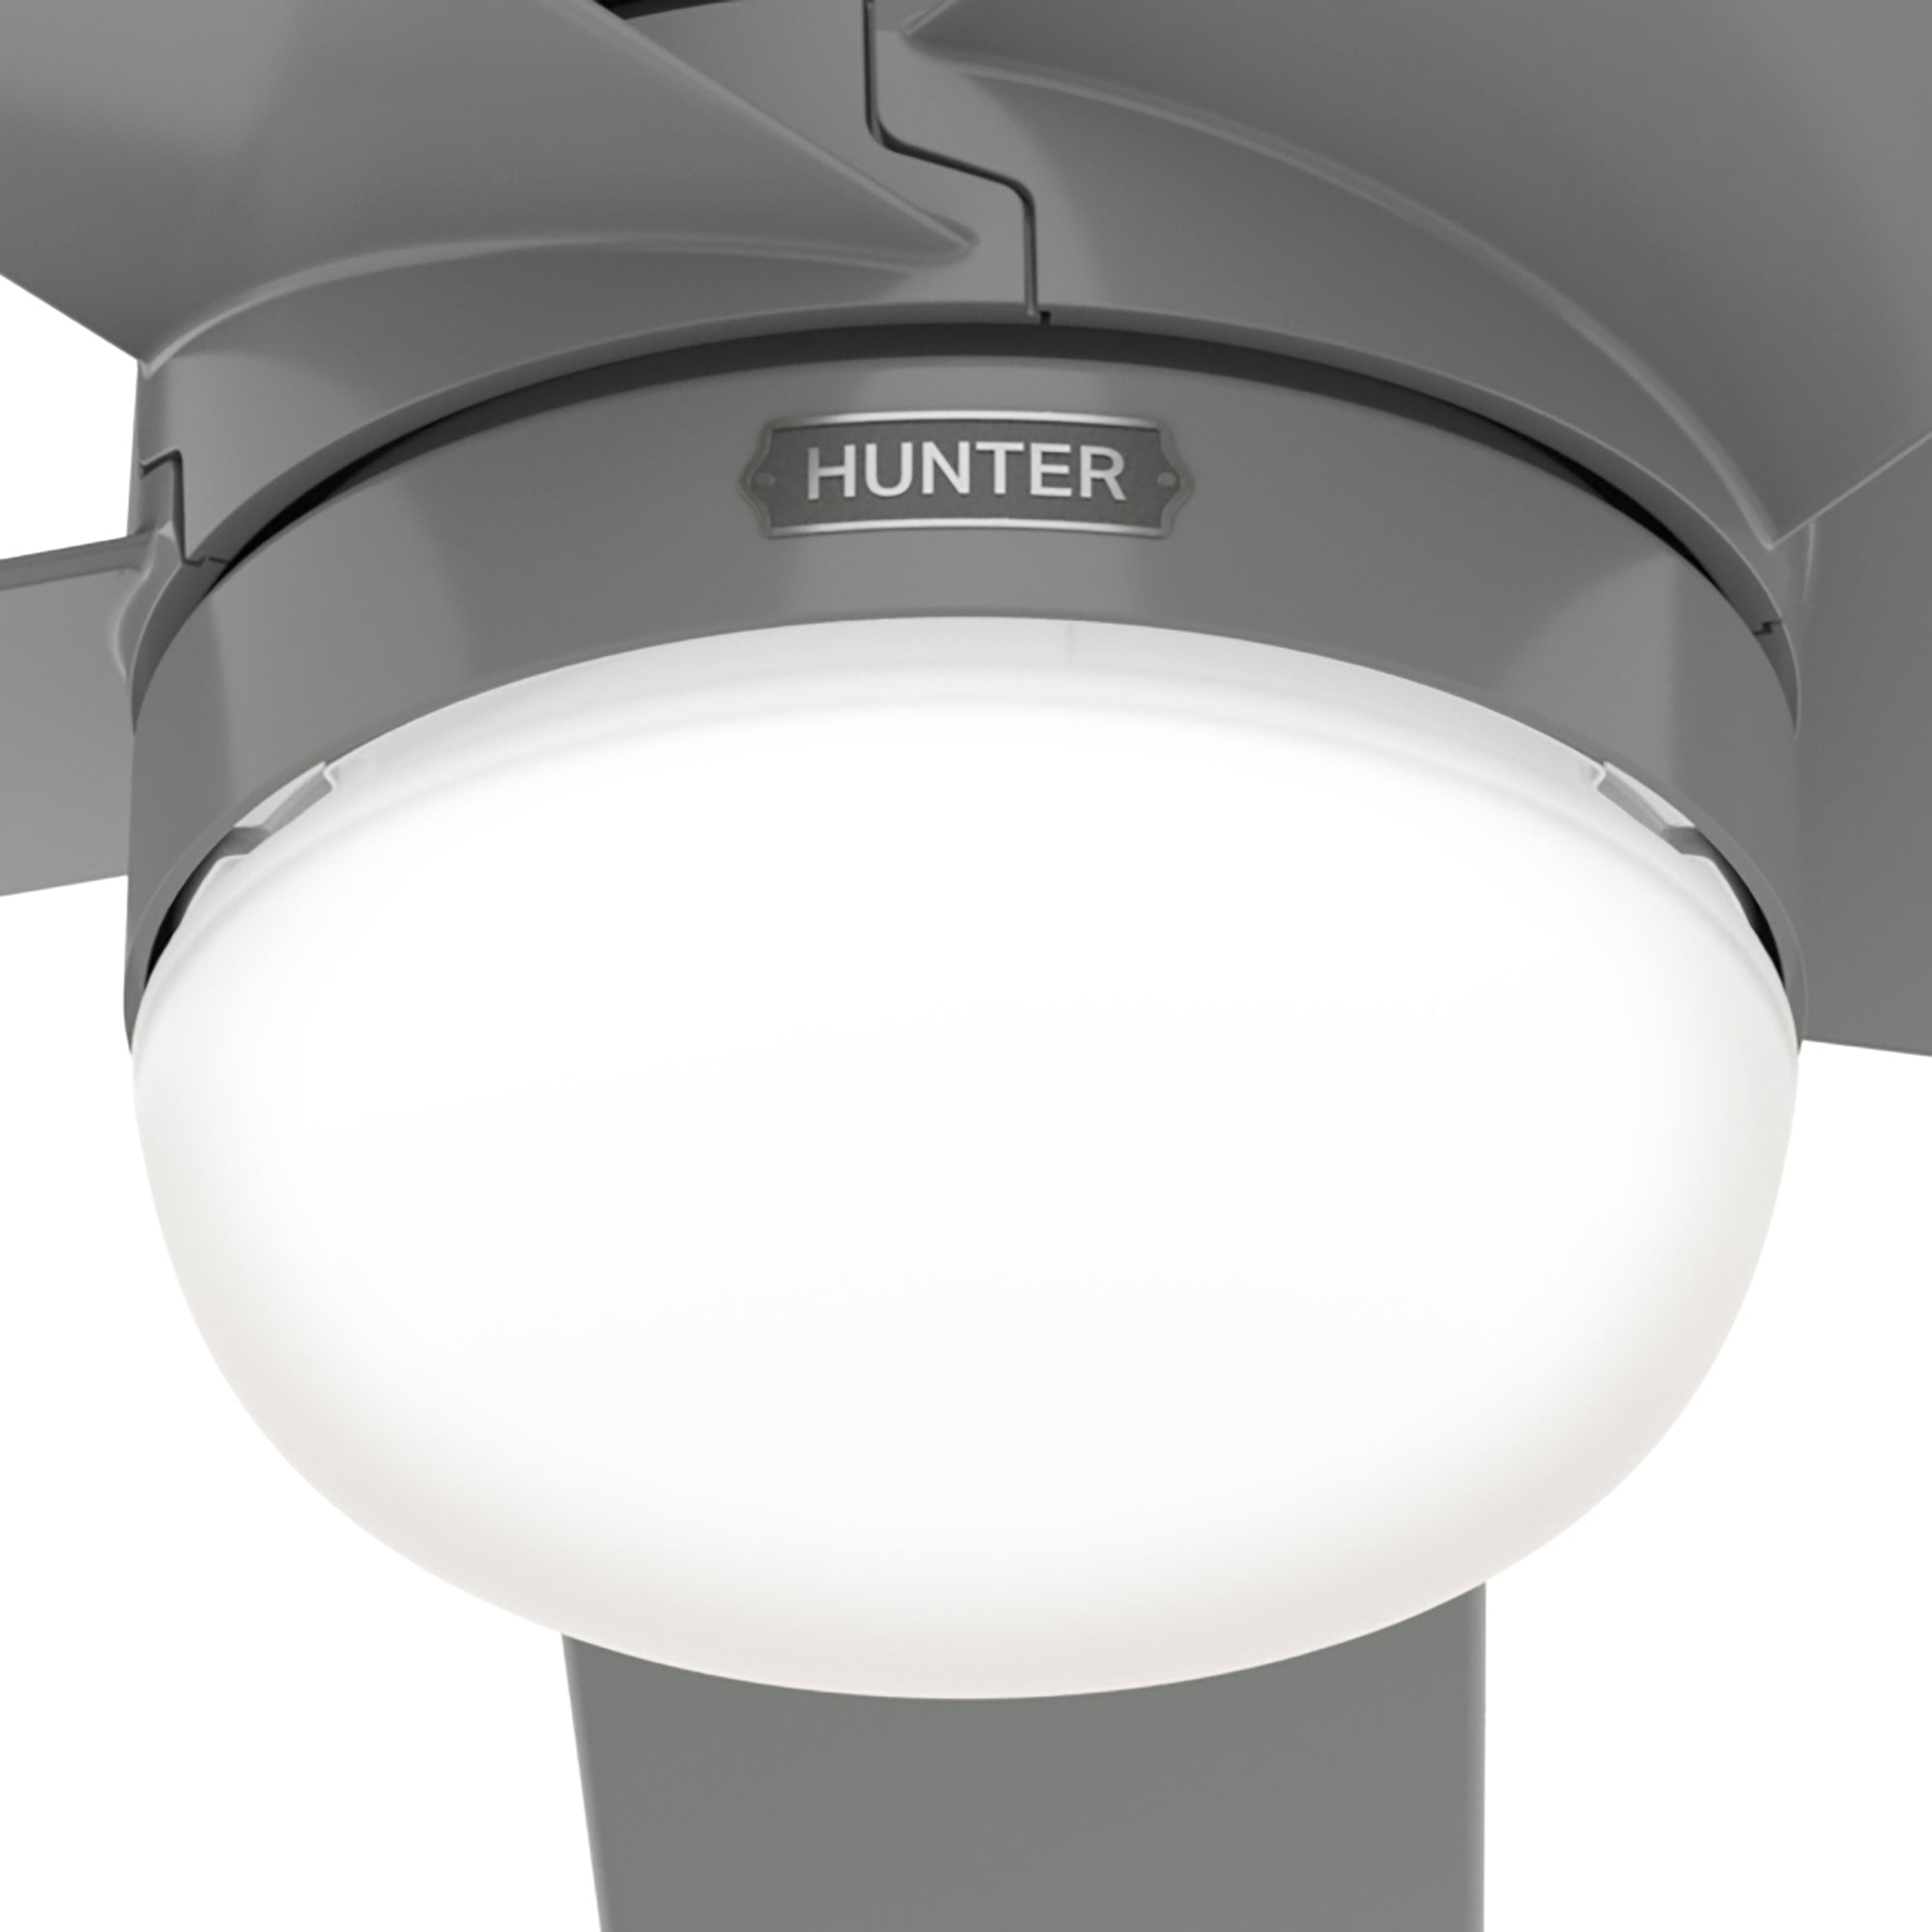 Hunter 52 inch Anorak Indoor / Outdoor Ceiling Fan with LED Light Kit and Wall Control Ceiling Fan Hunter Quartz Grey Quartz Grey / Quartz Grey Painted Cased White